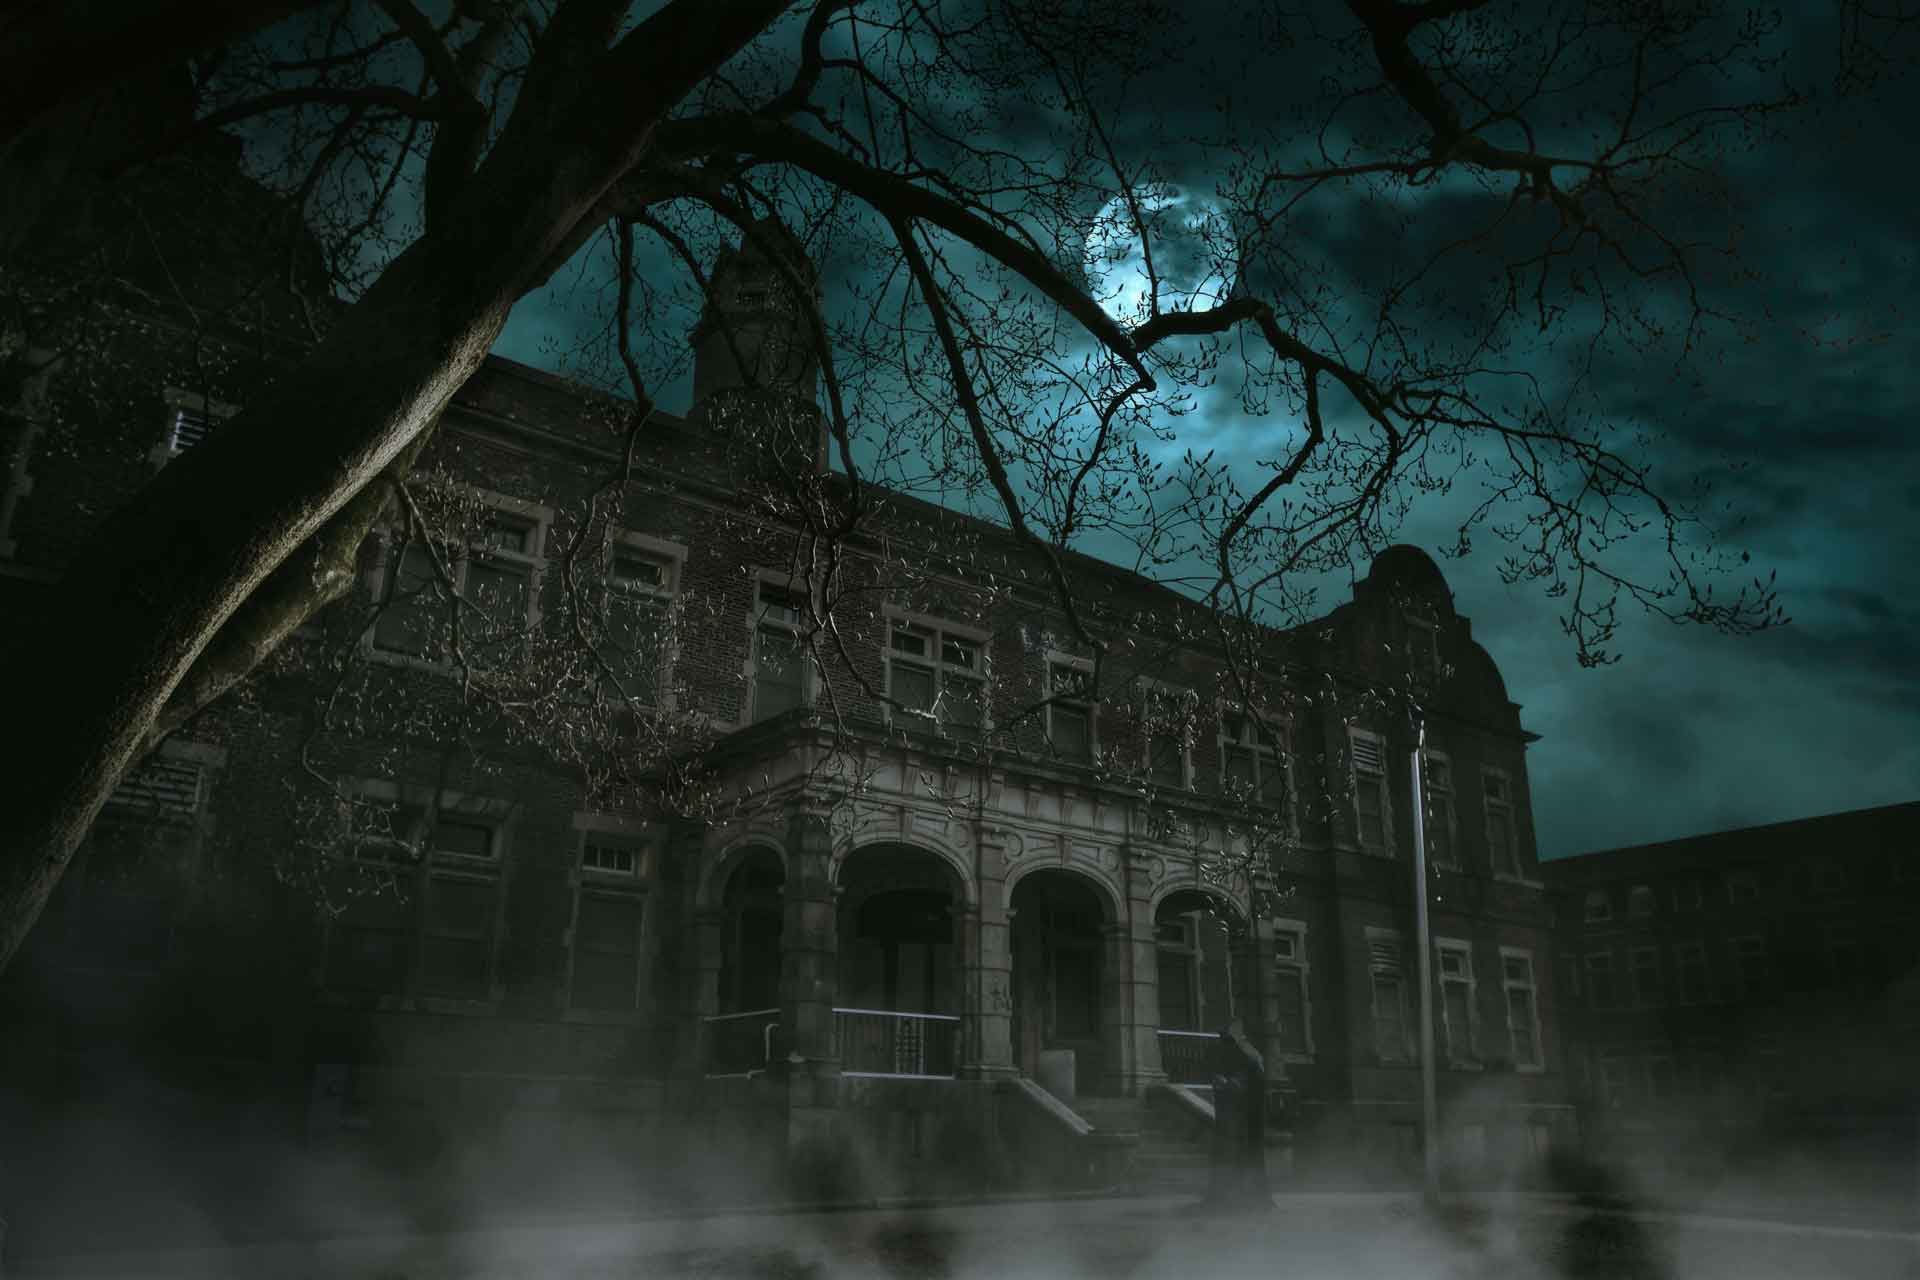 Back haunted house halloween special